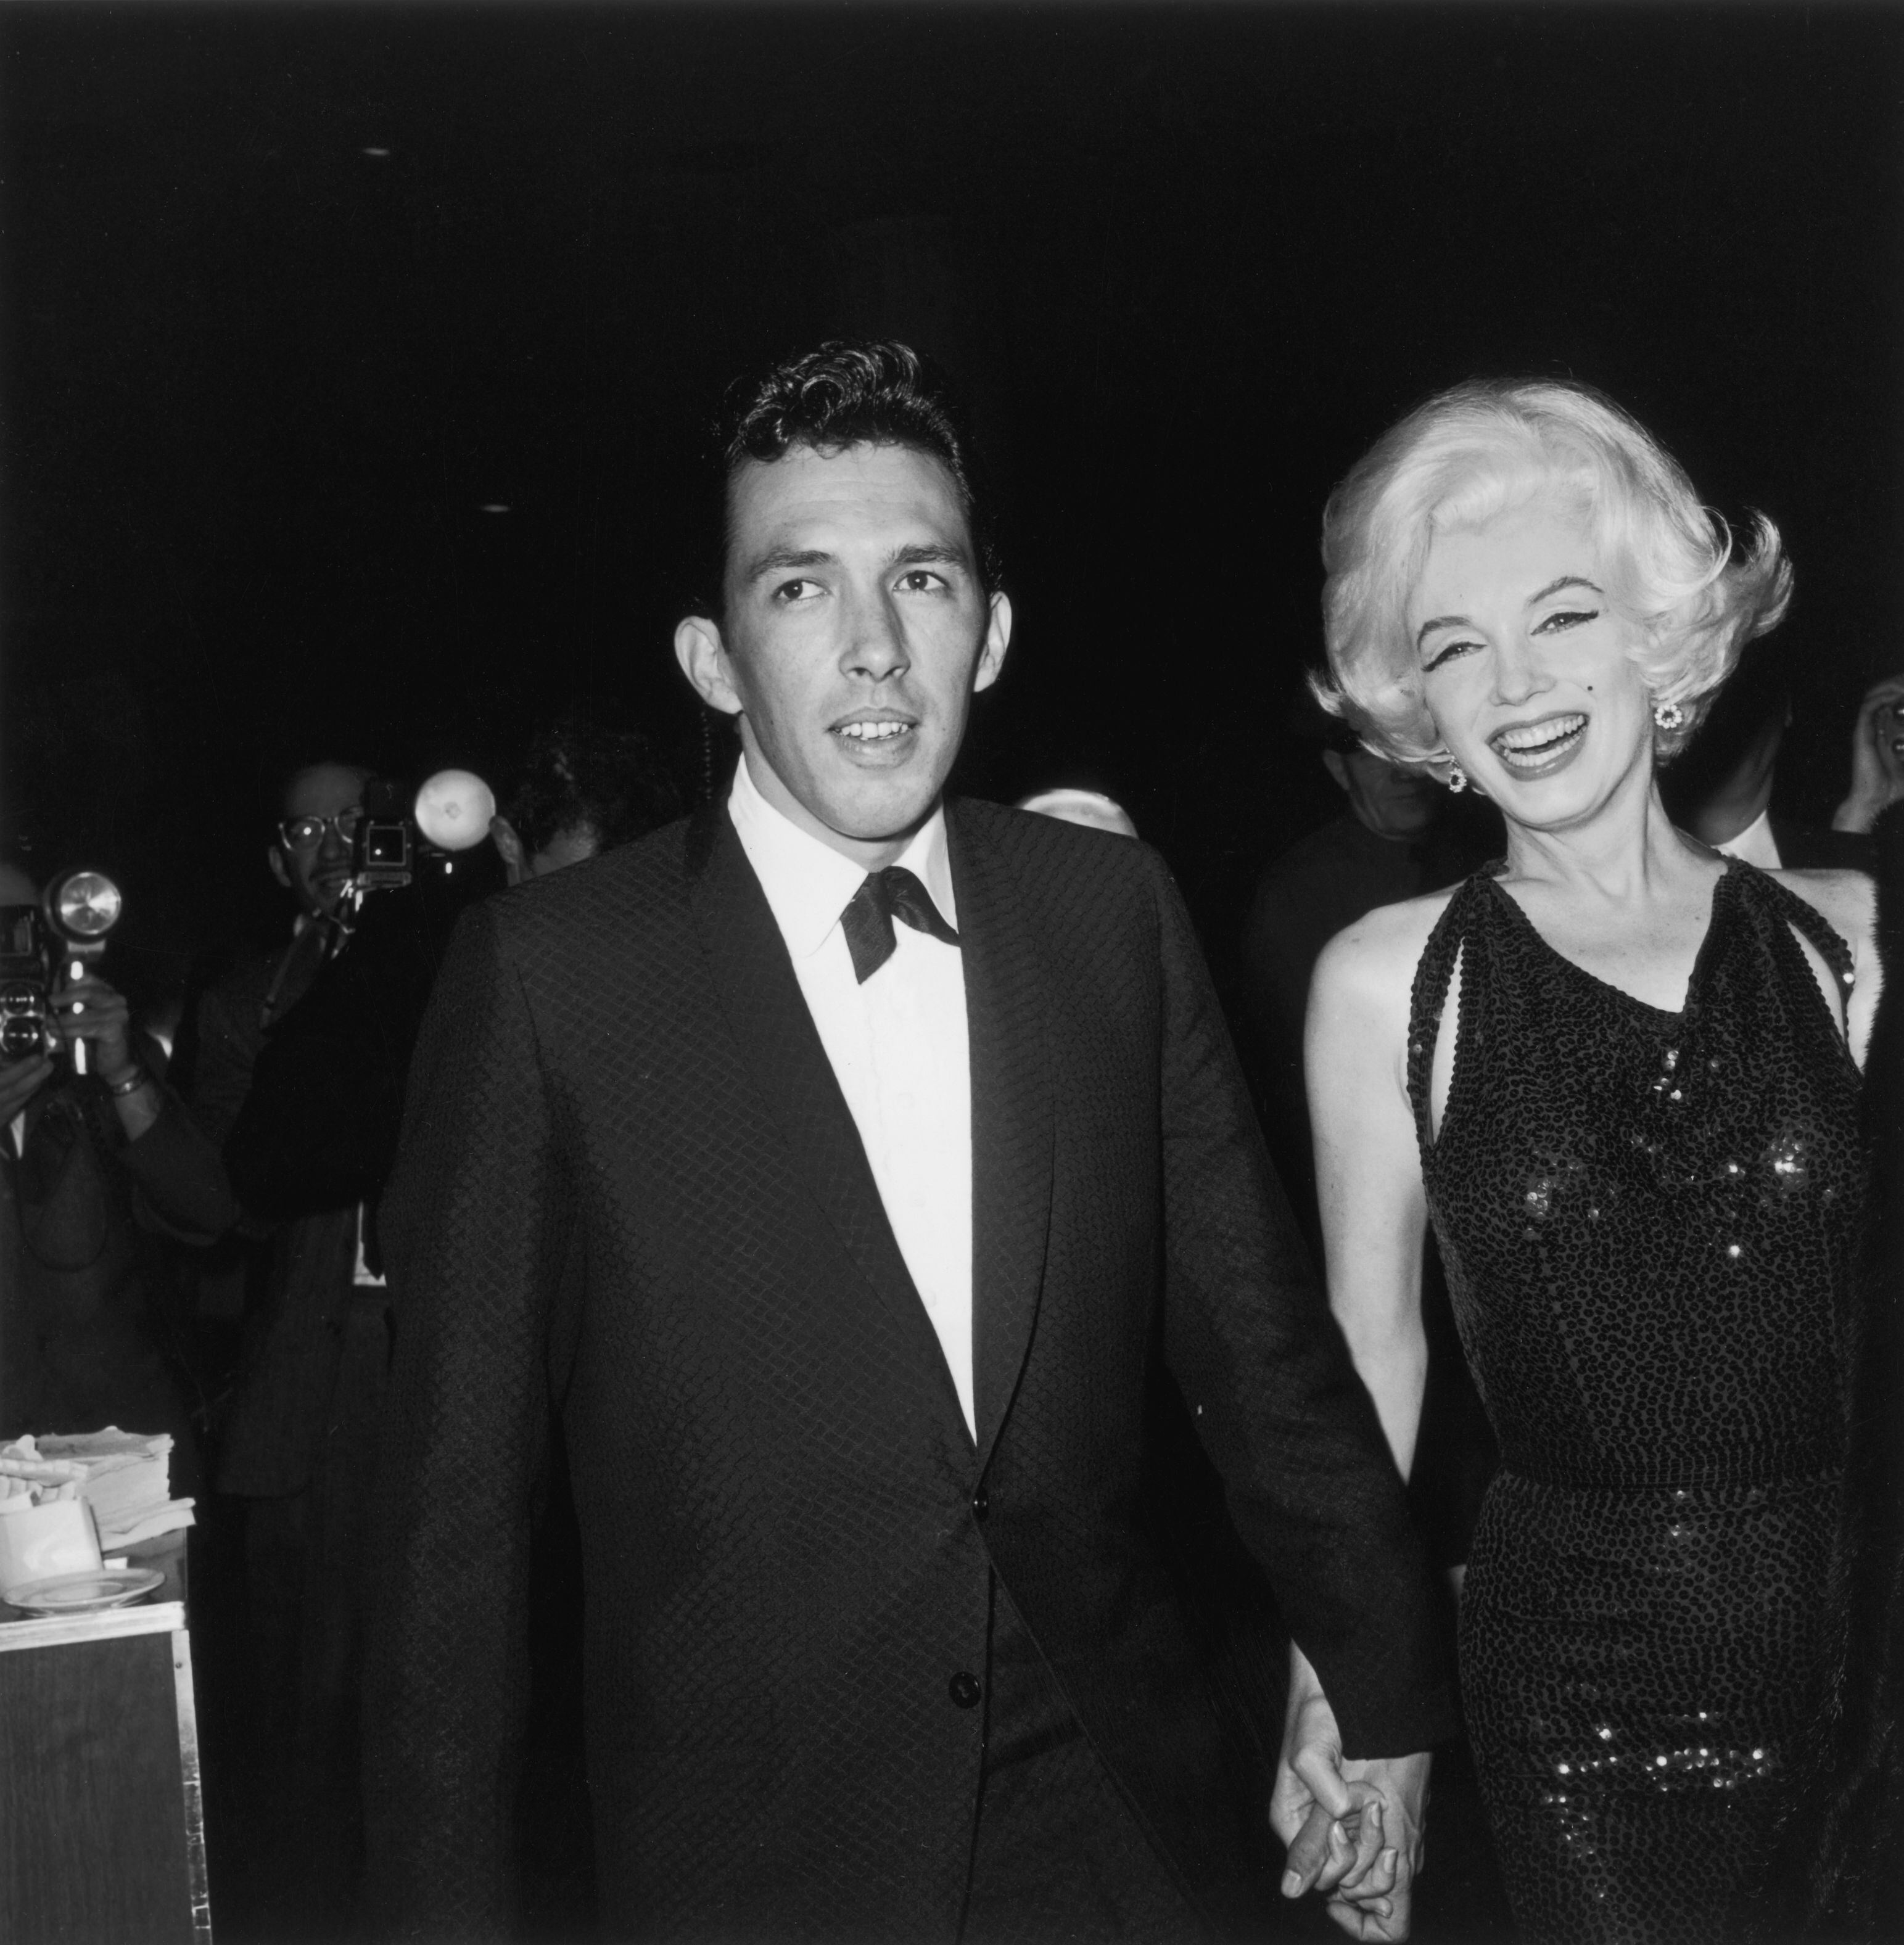 Marilyn Monroe with writer José Bolaños at the Golden Globe Awards in California.